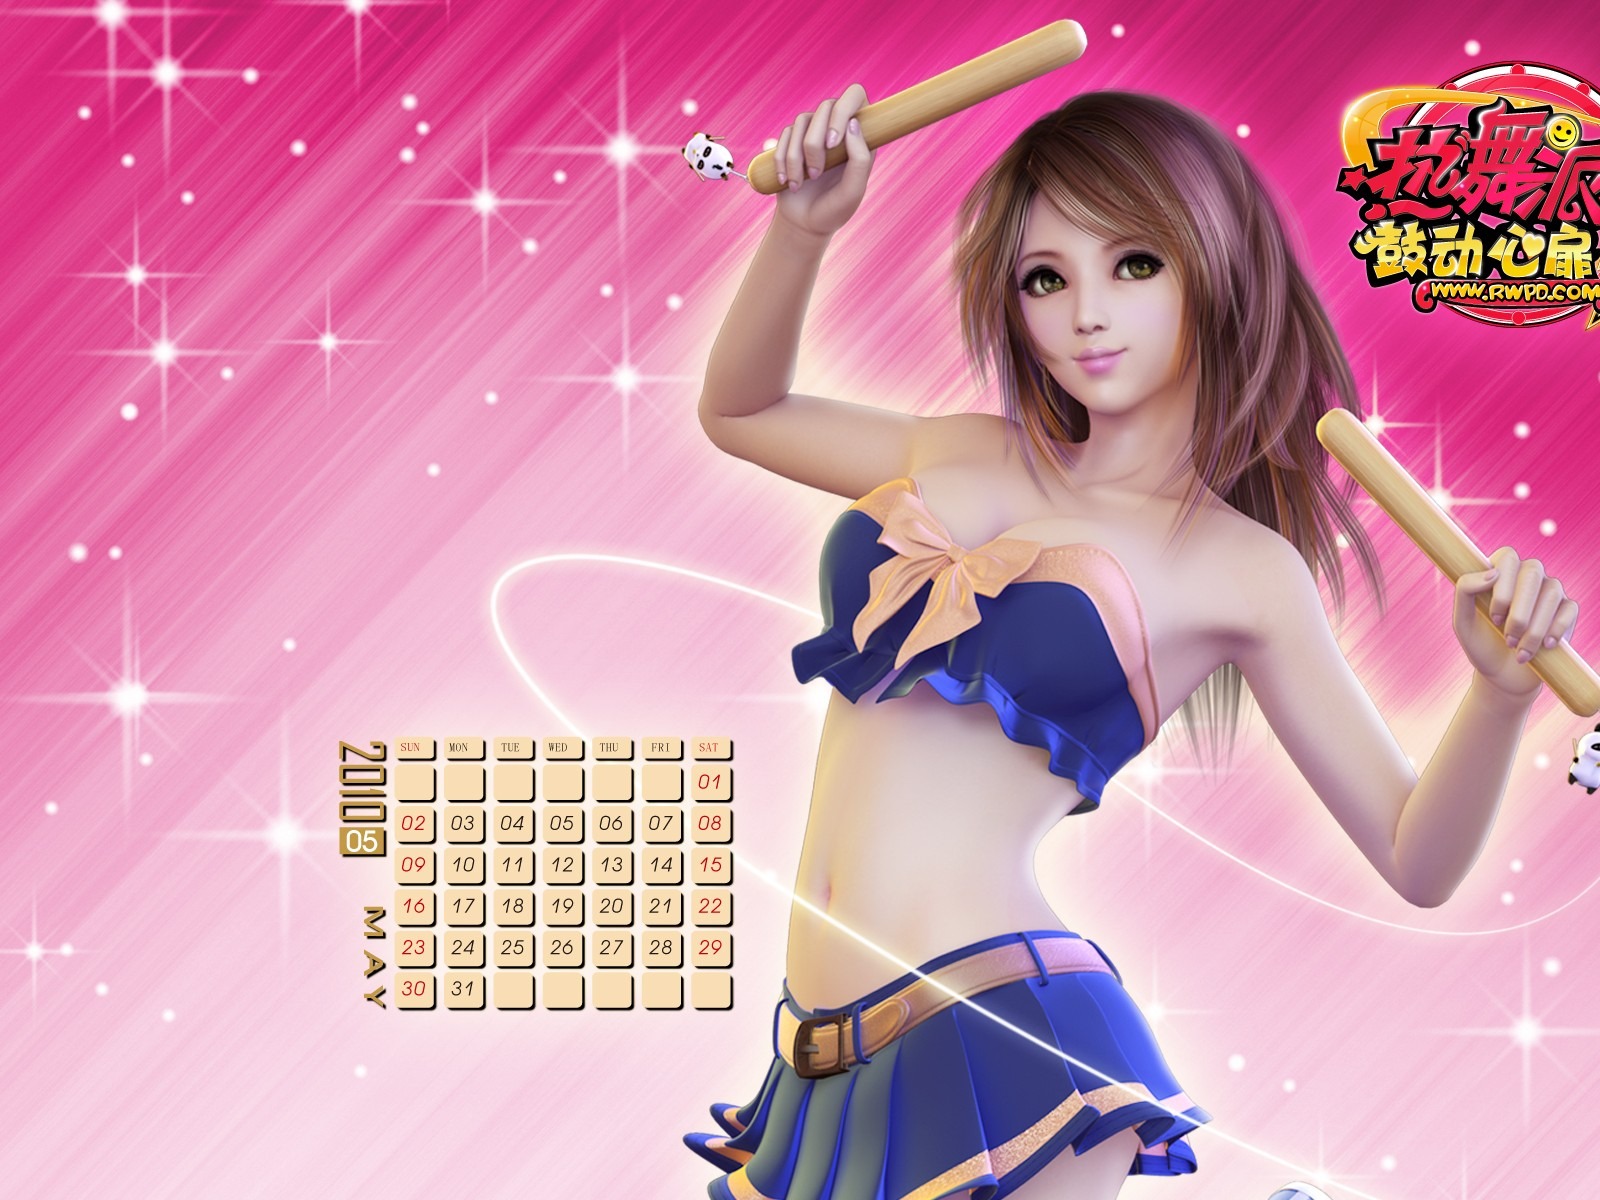 Online game Hot Dance Party II official wallpapers #24 - 1600x1200